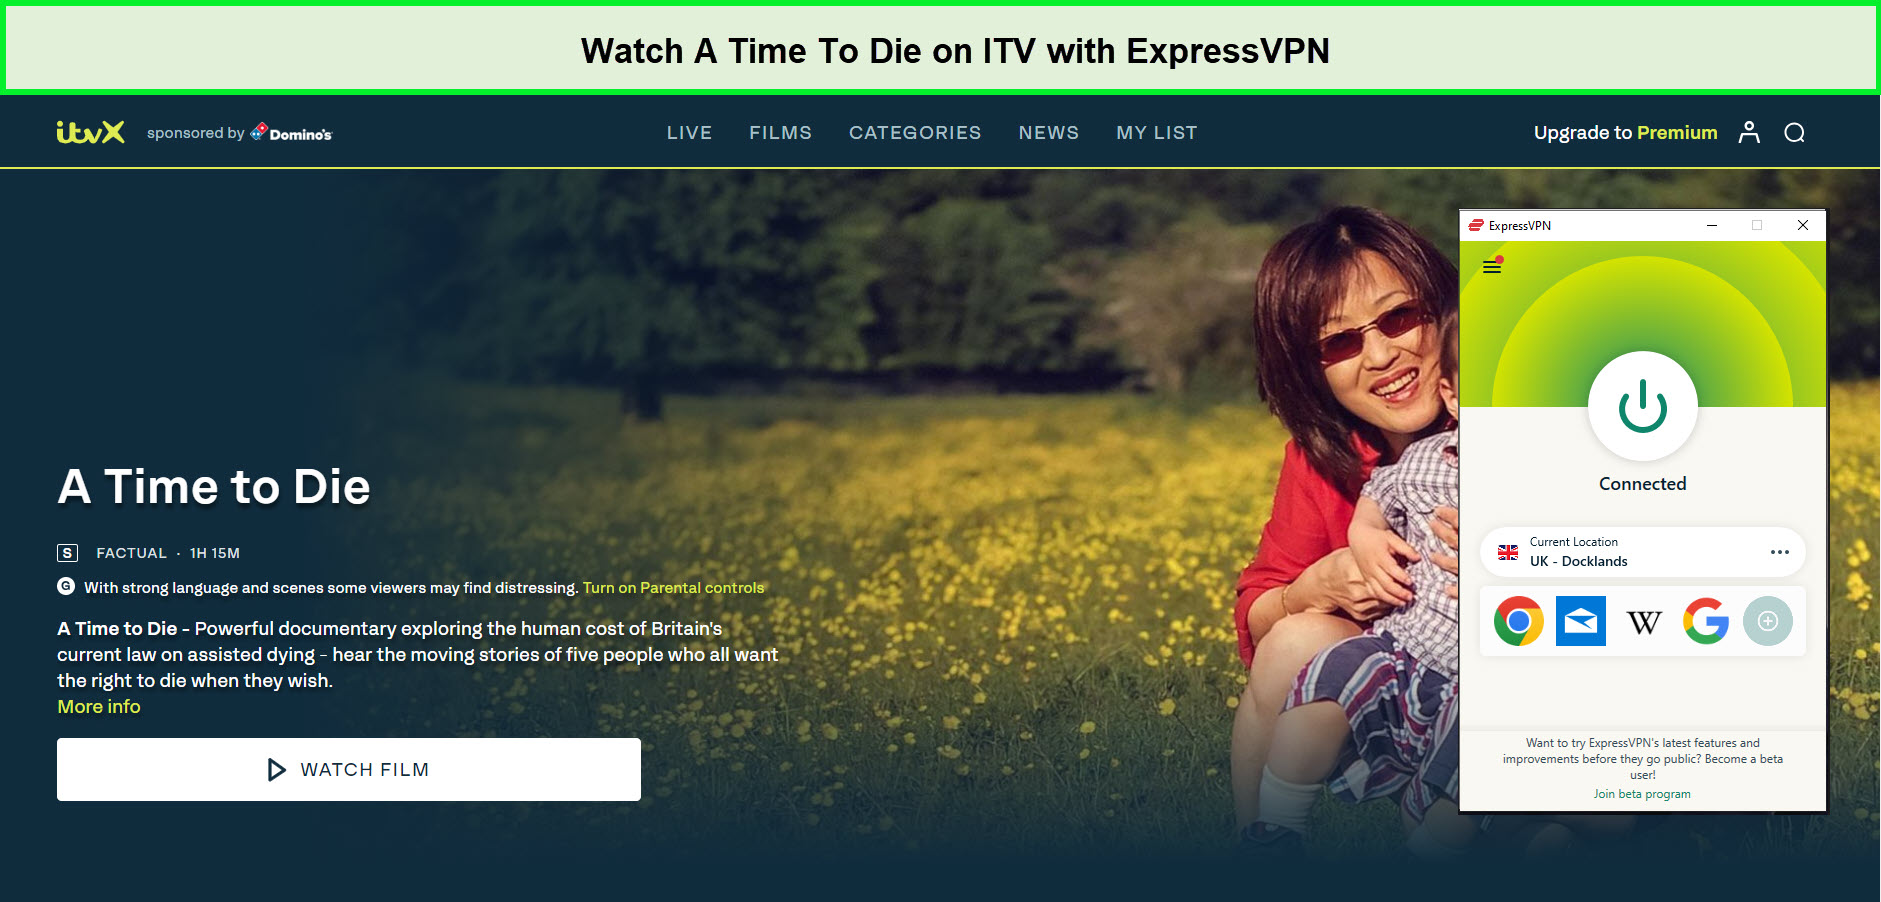 Watch-A-Time-To-Die-in-Germany-on-ITV-with-ExpressVPN